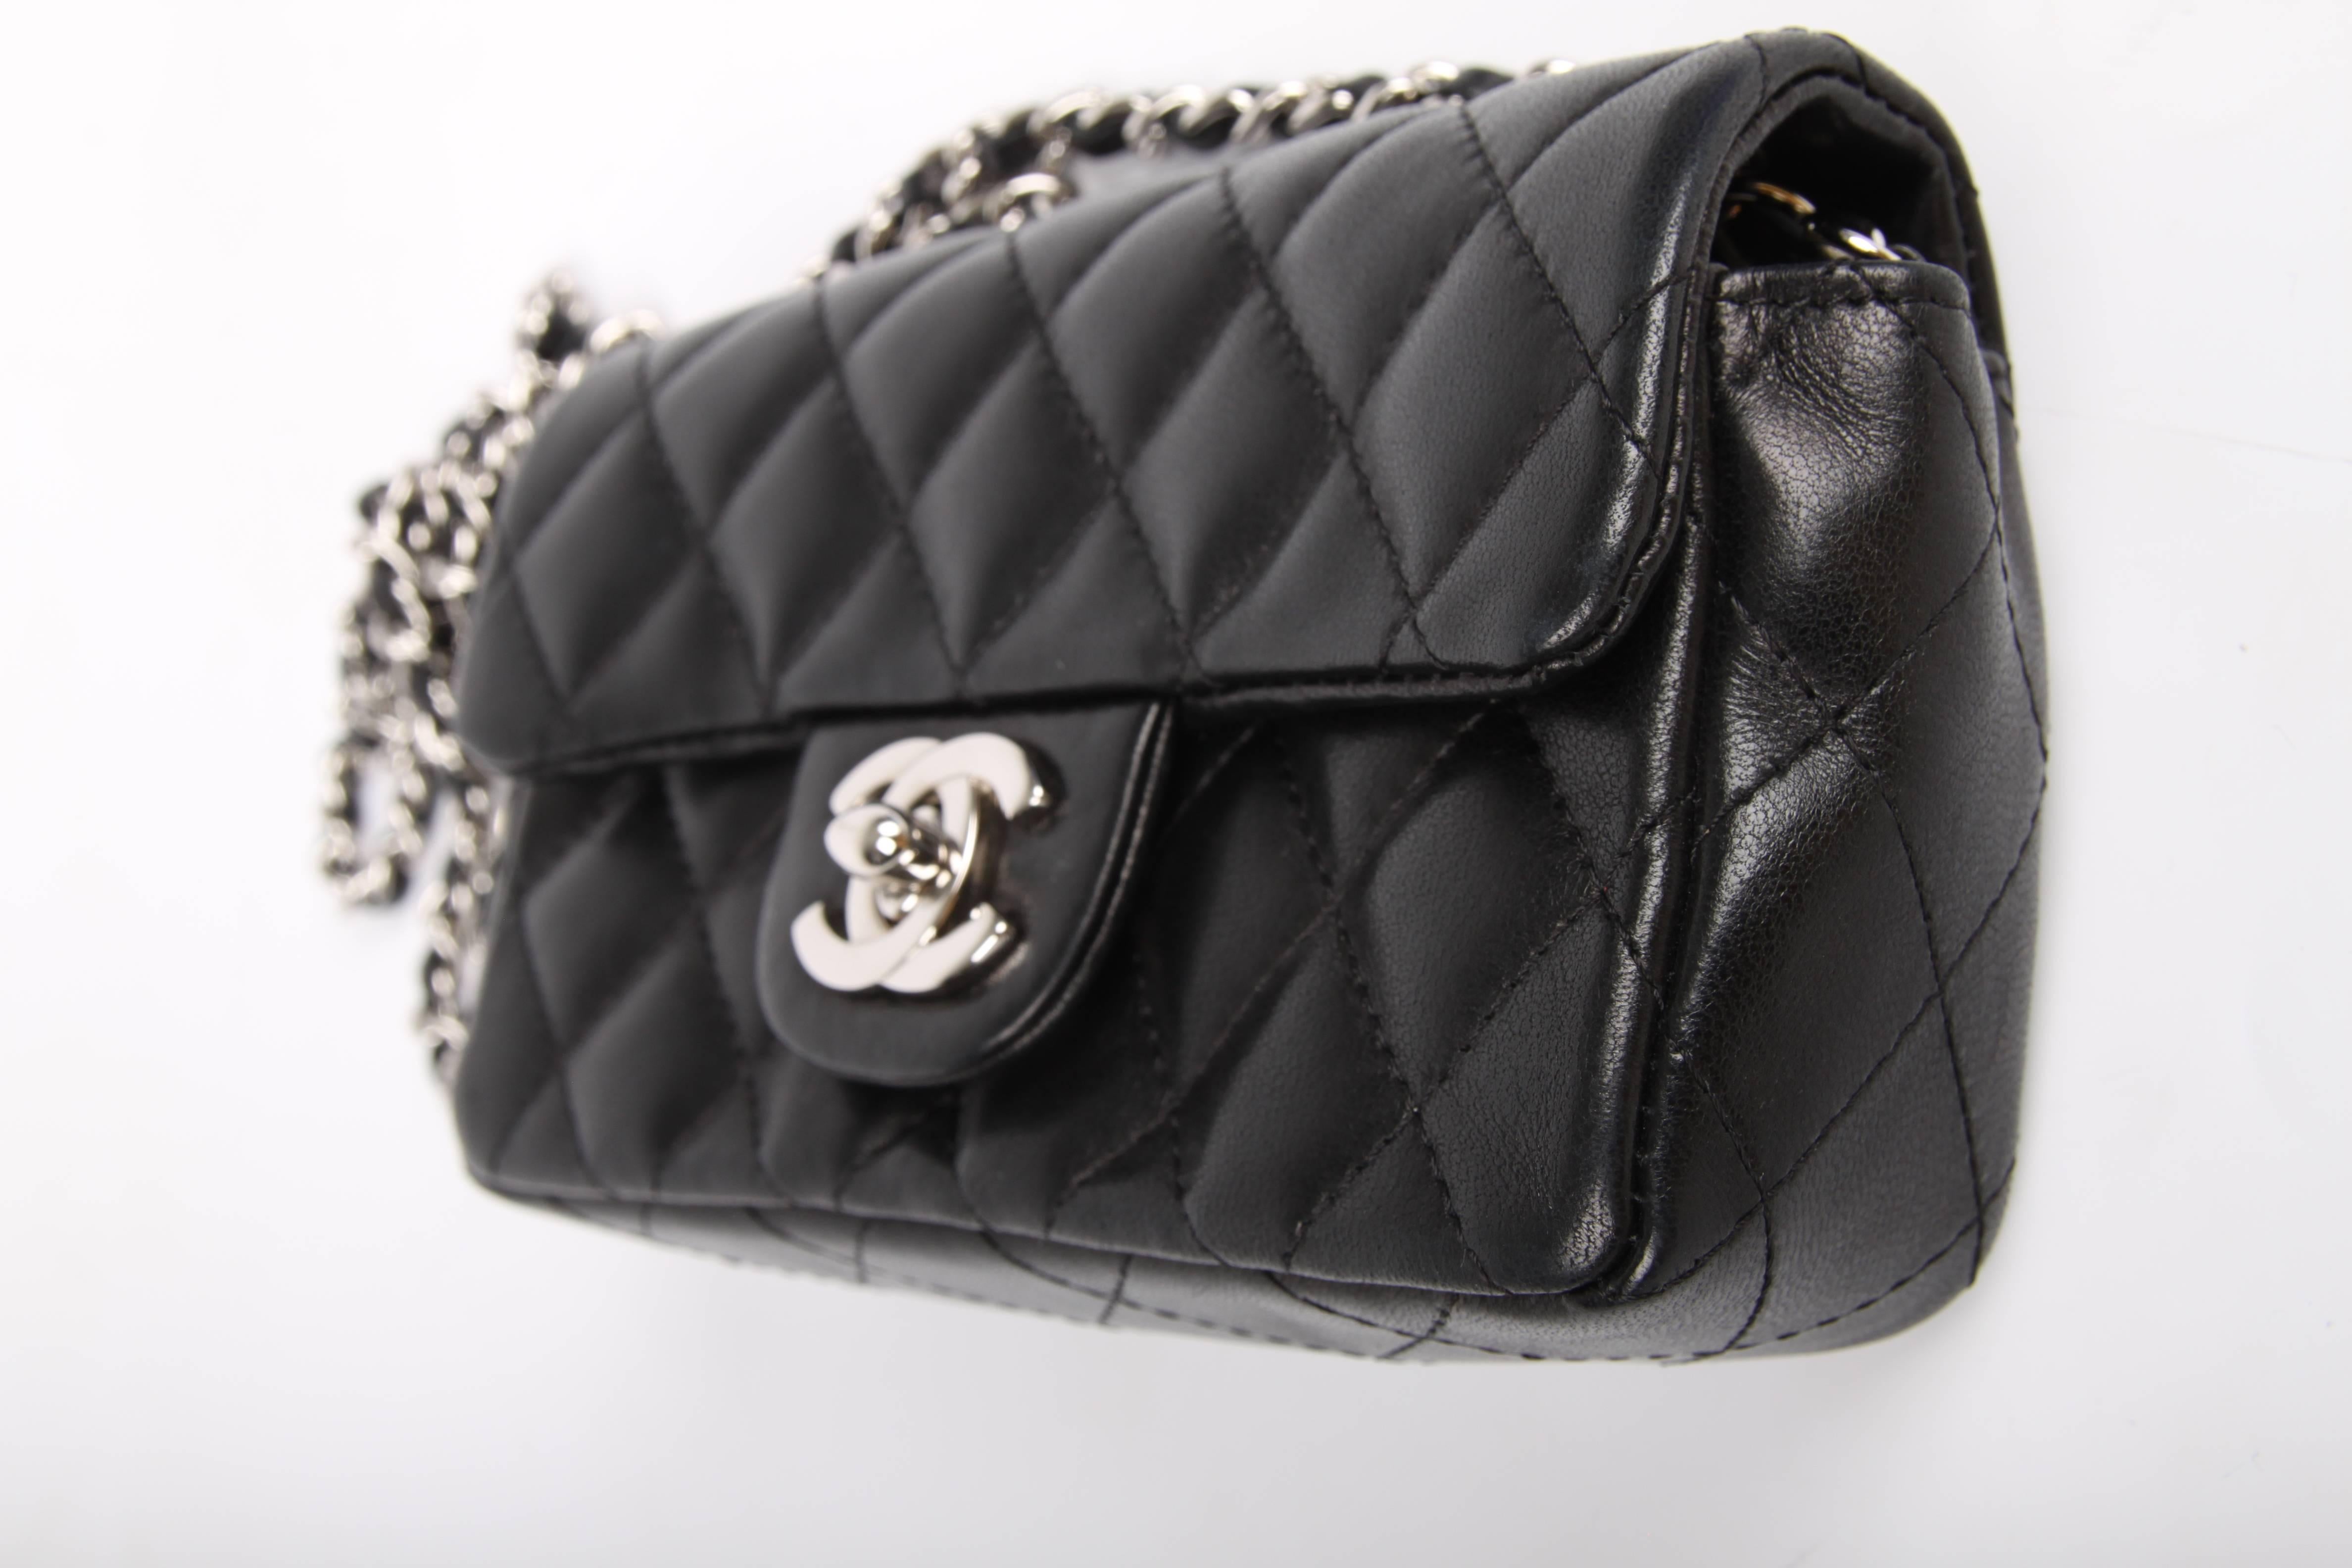 Chanel Black leather quilted Mini bag, 2005 3